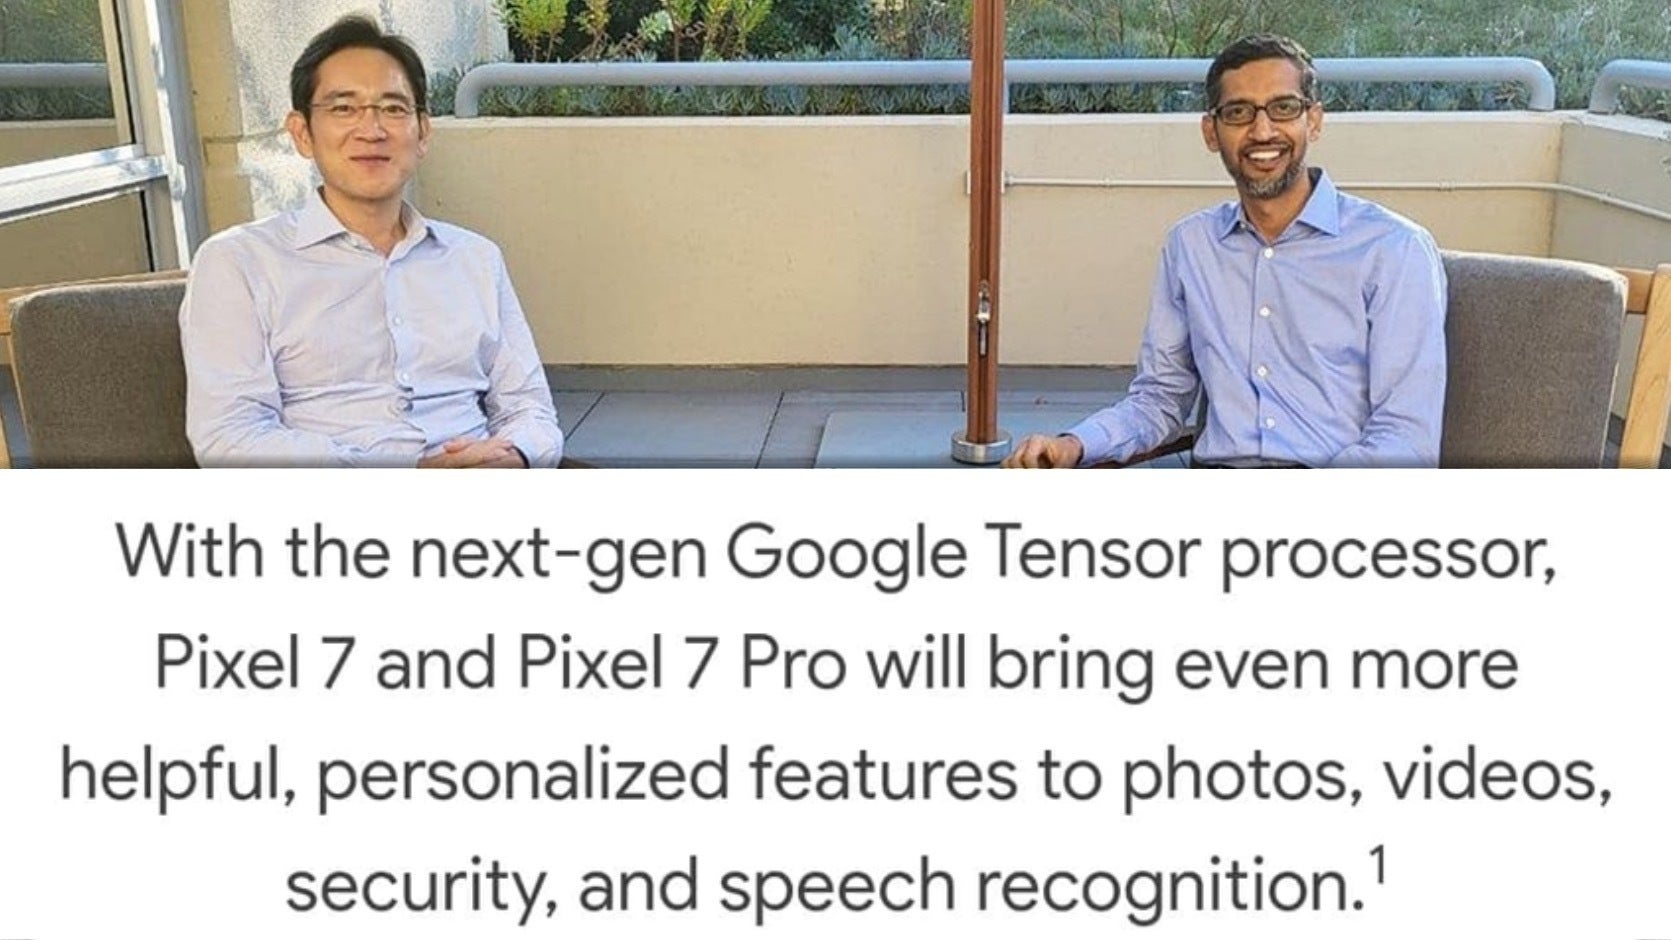 Tensor G2 will be a special chip thanks to its AI capabilities. But what about raw power? - Pixel 7 and Tensor G2 - leaving Qualcomm to cuddle up with Samsung - Google's biggest mistake?